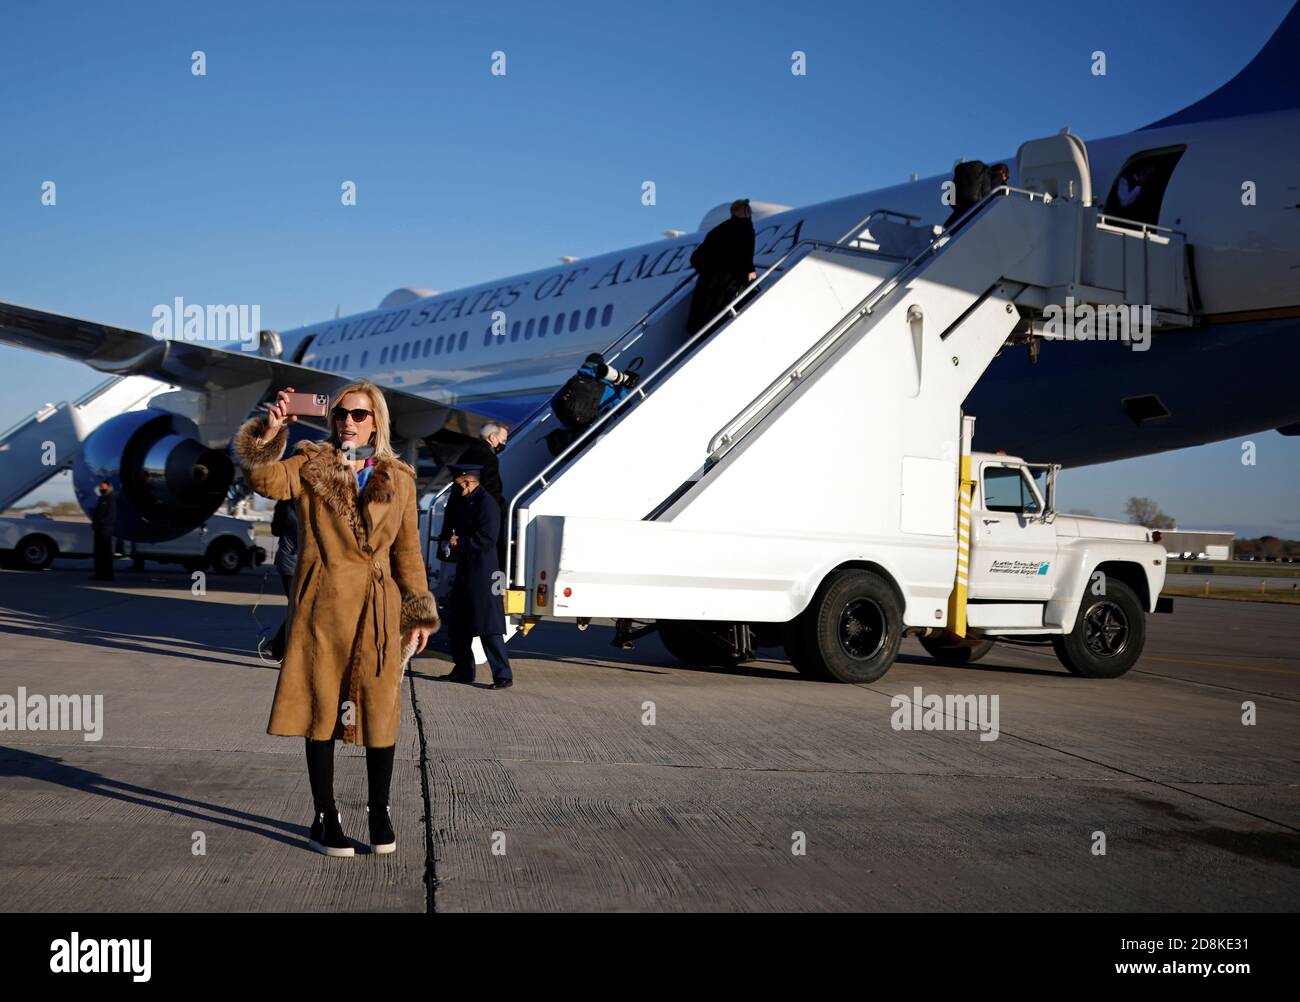 Laura Ingraham, TV host in Fox News, is seen before boarding Air Force One after attending a campaign rally for U.S. President Donald Trump at Green Bay Austin Straubel International Airport in Green Bay, Wisconsin, U.S., October 30, 2020. REUTERS/Carlos Barria Stock Photo